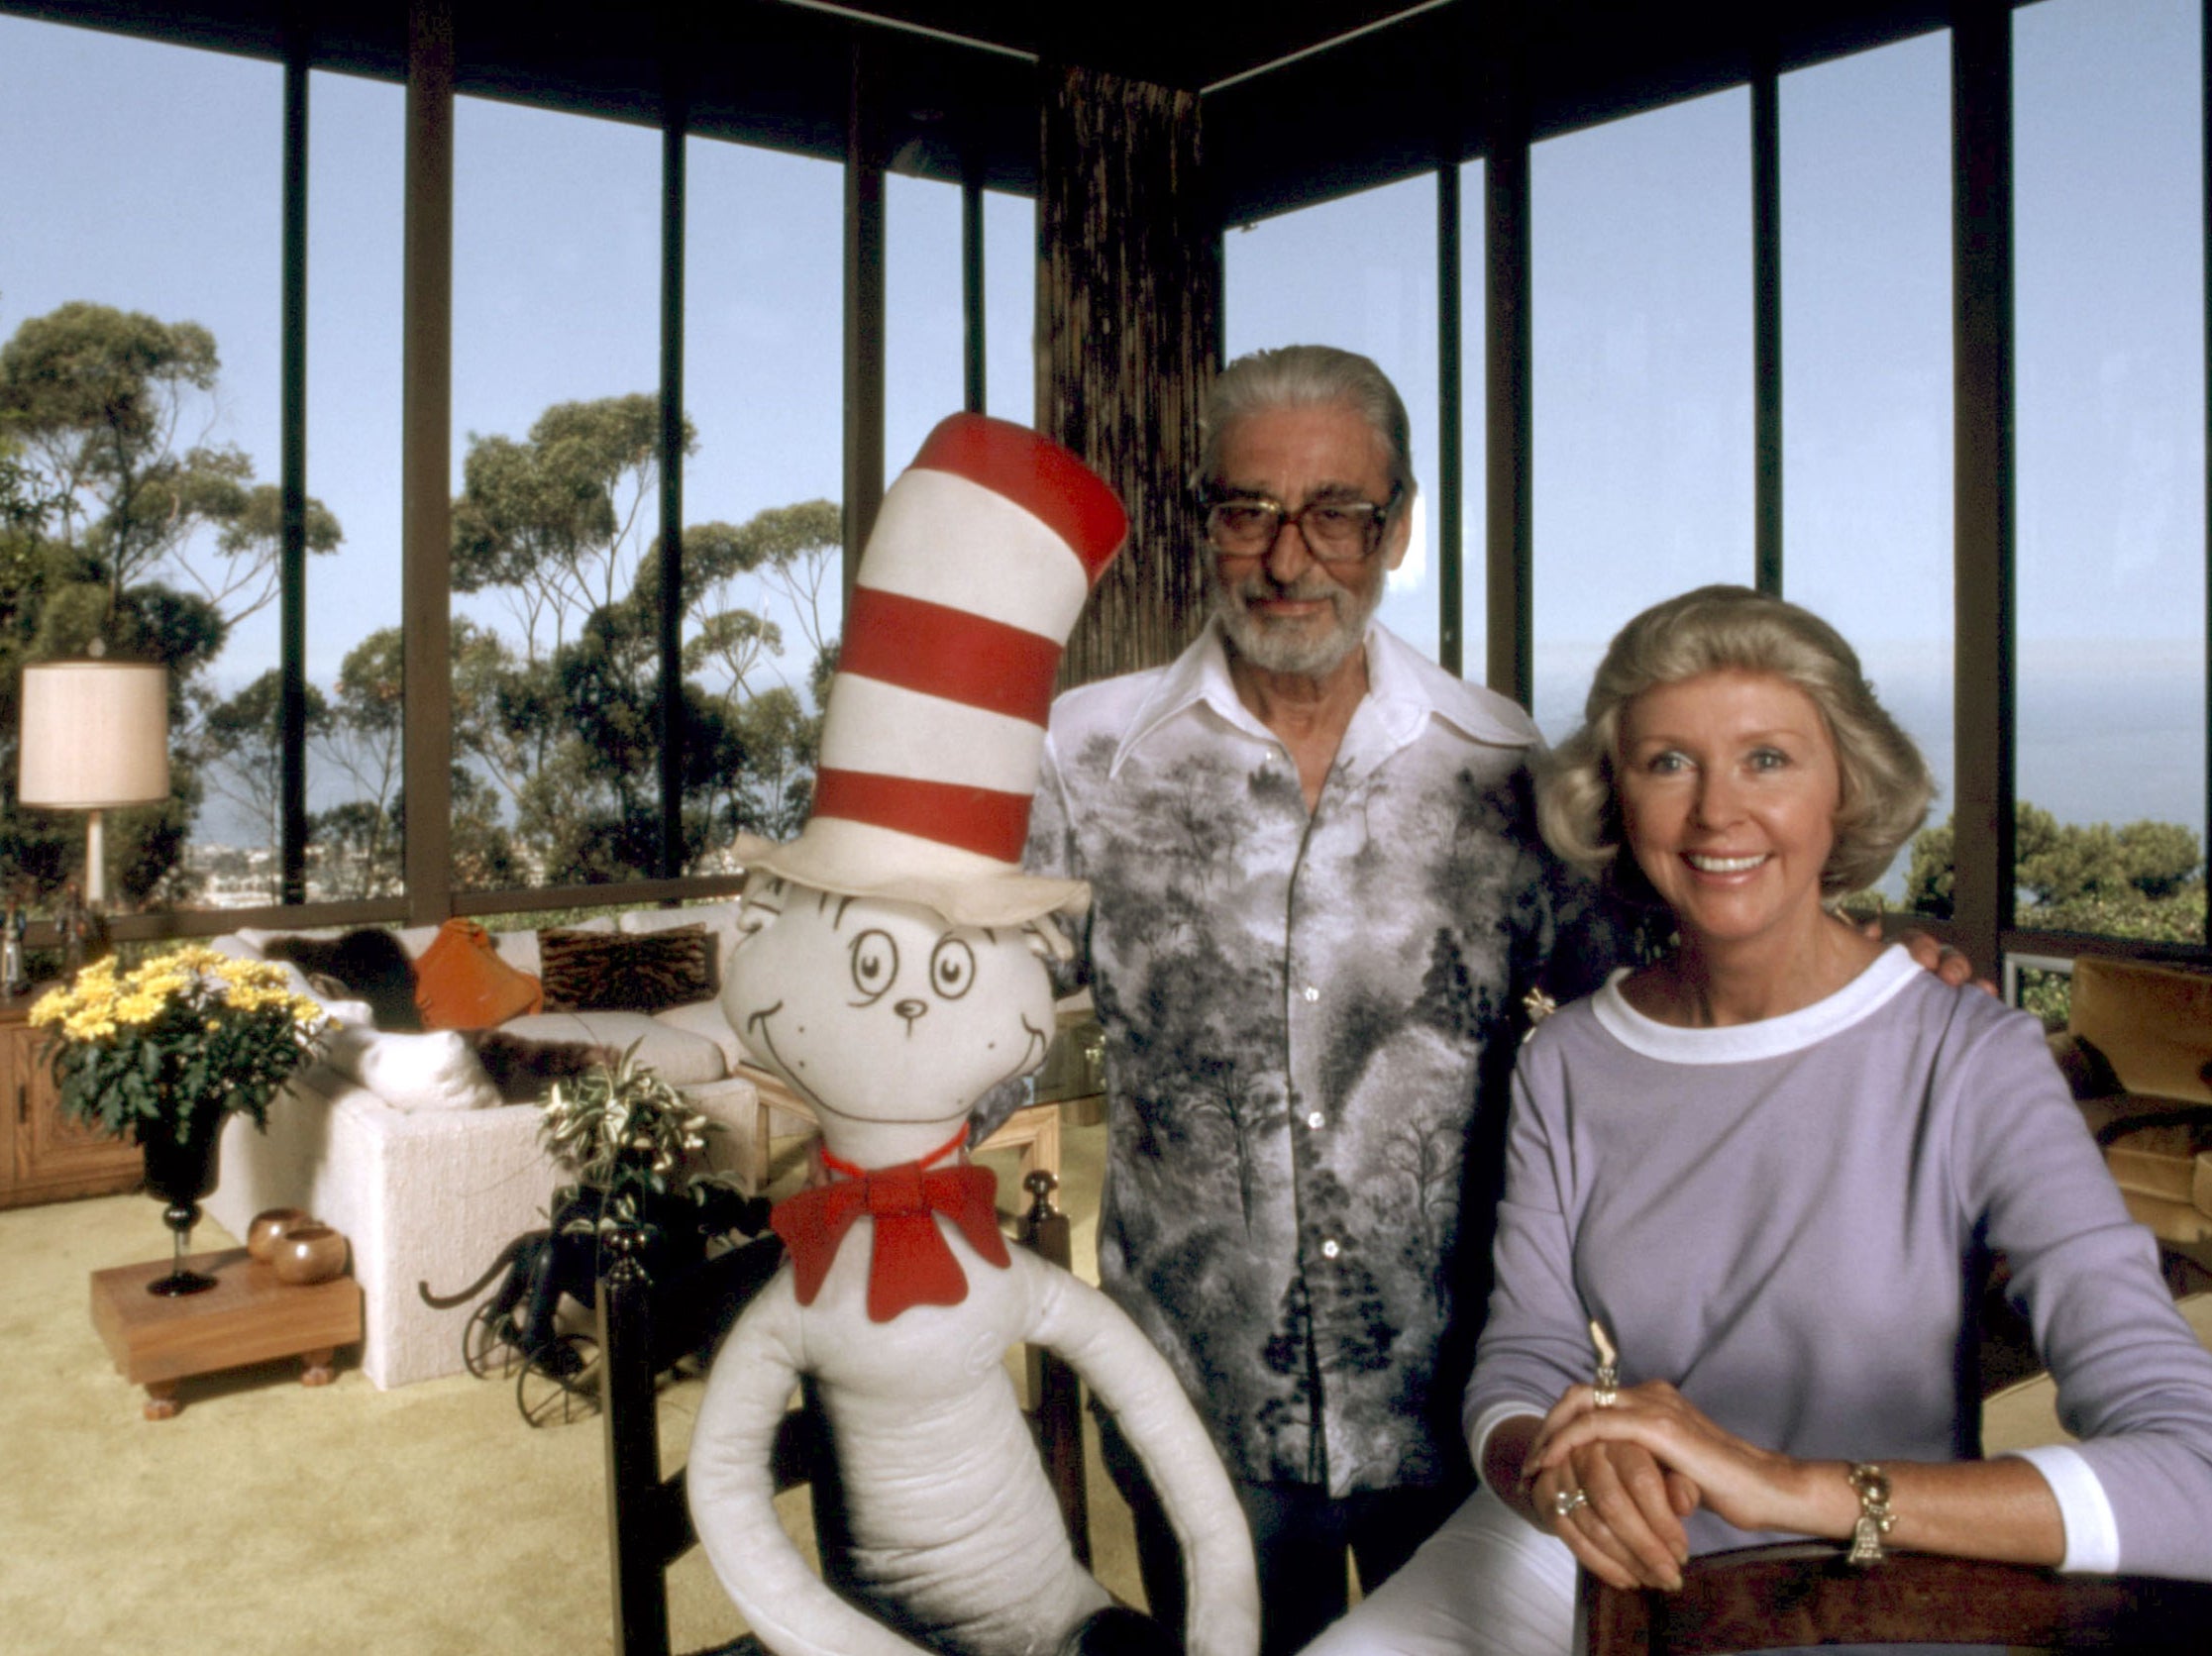 Theodor Geisel and his wife, Audrey, c. 1981